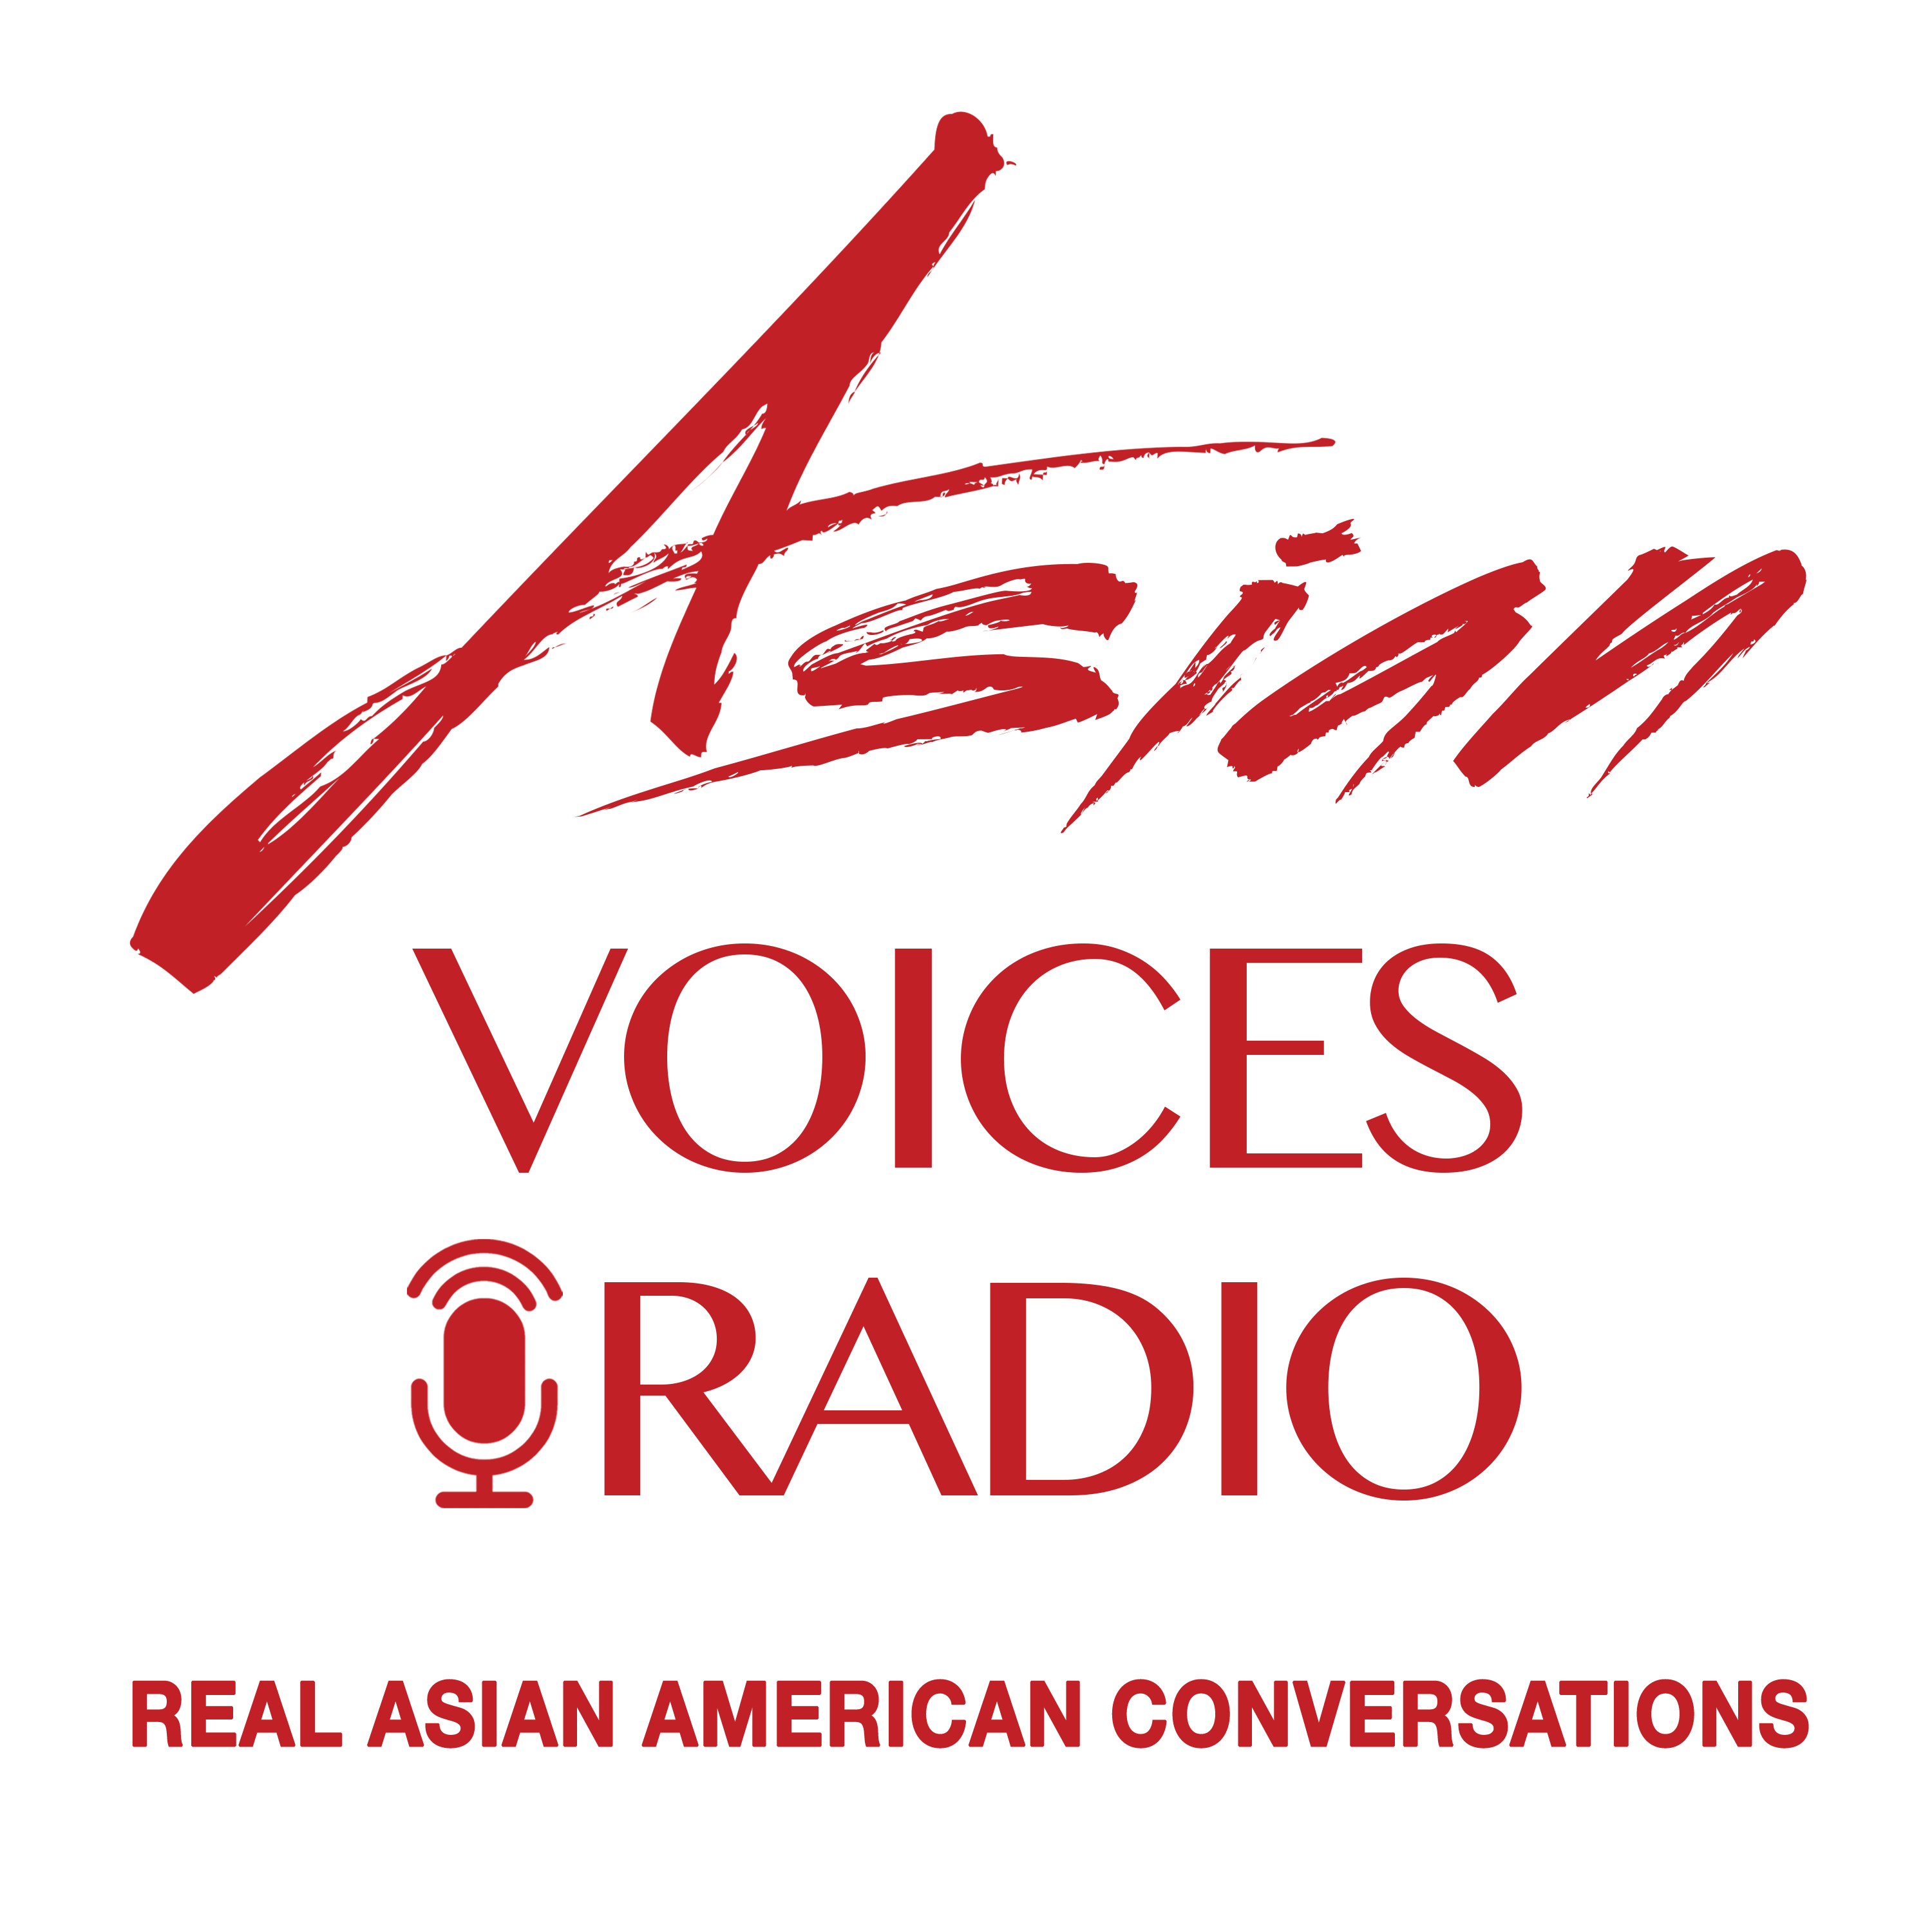 Amplifying the voices of Asian Americans